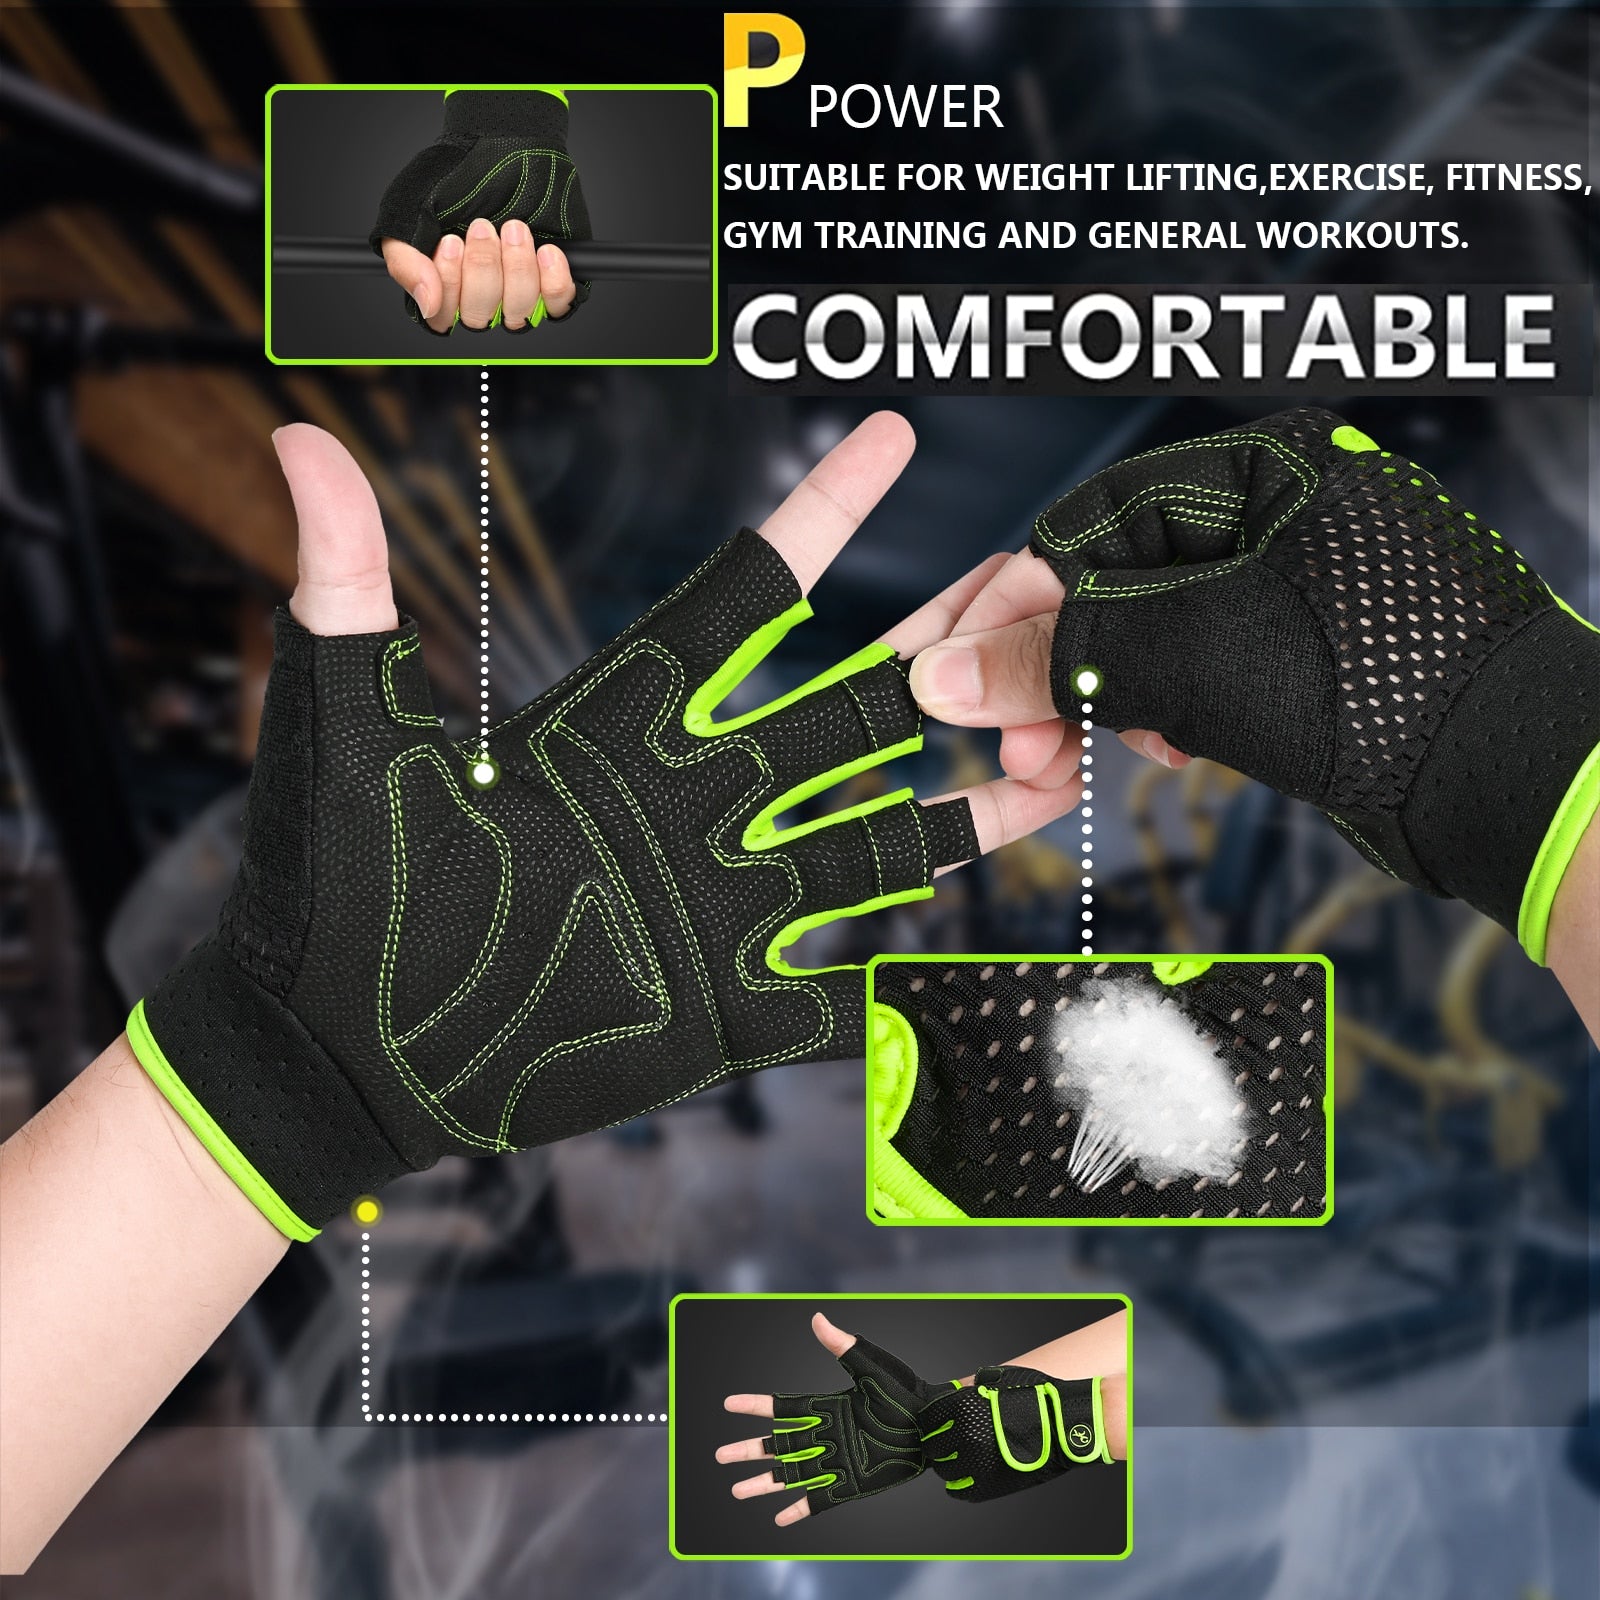 Gym Workout Gloves for Men Women,Weight Lifting Gloves Excellent Grip,Lightweight Fitness Training Gloves for Pull Ups,Rowing